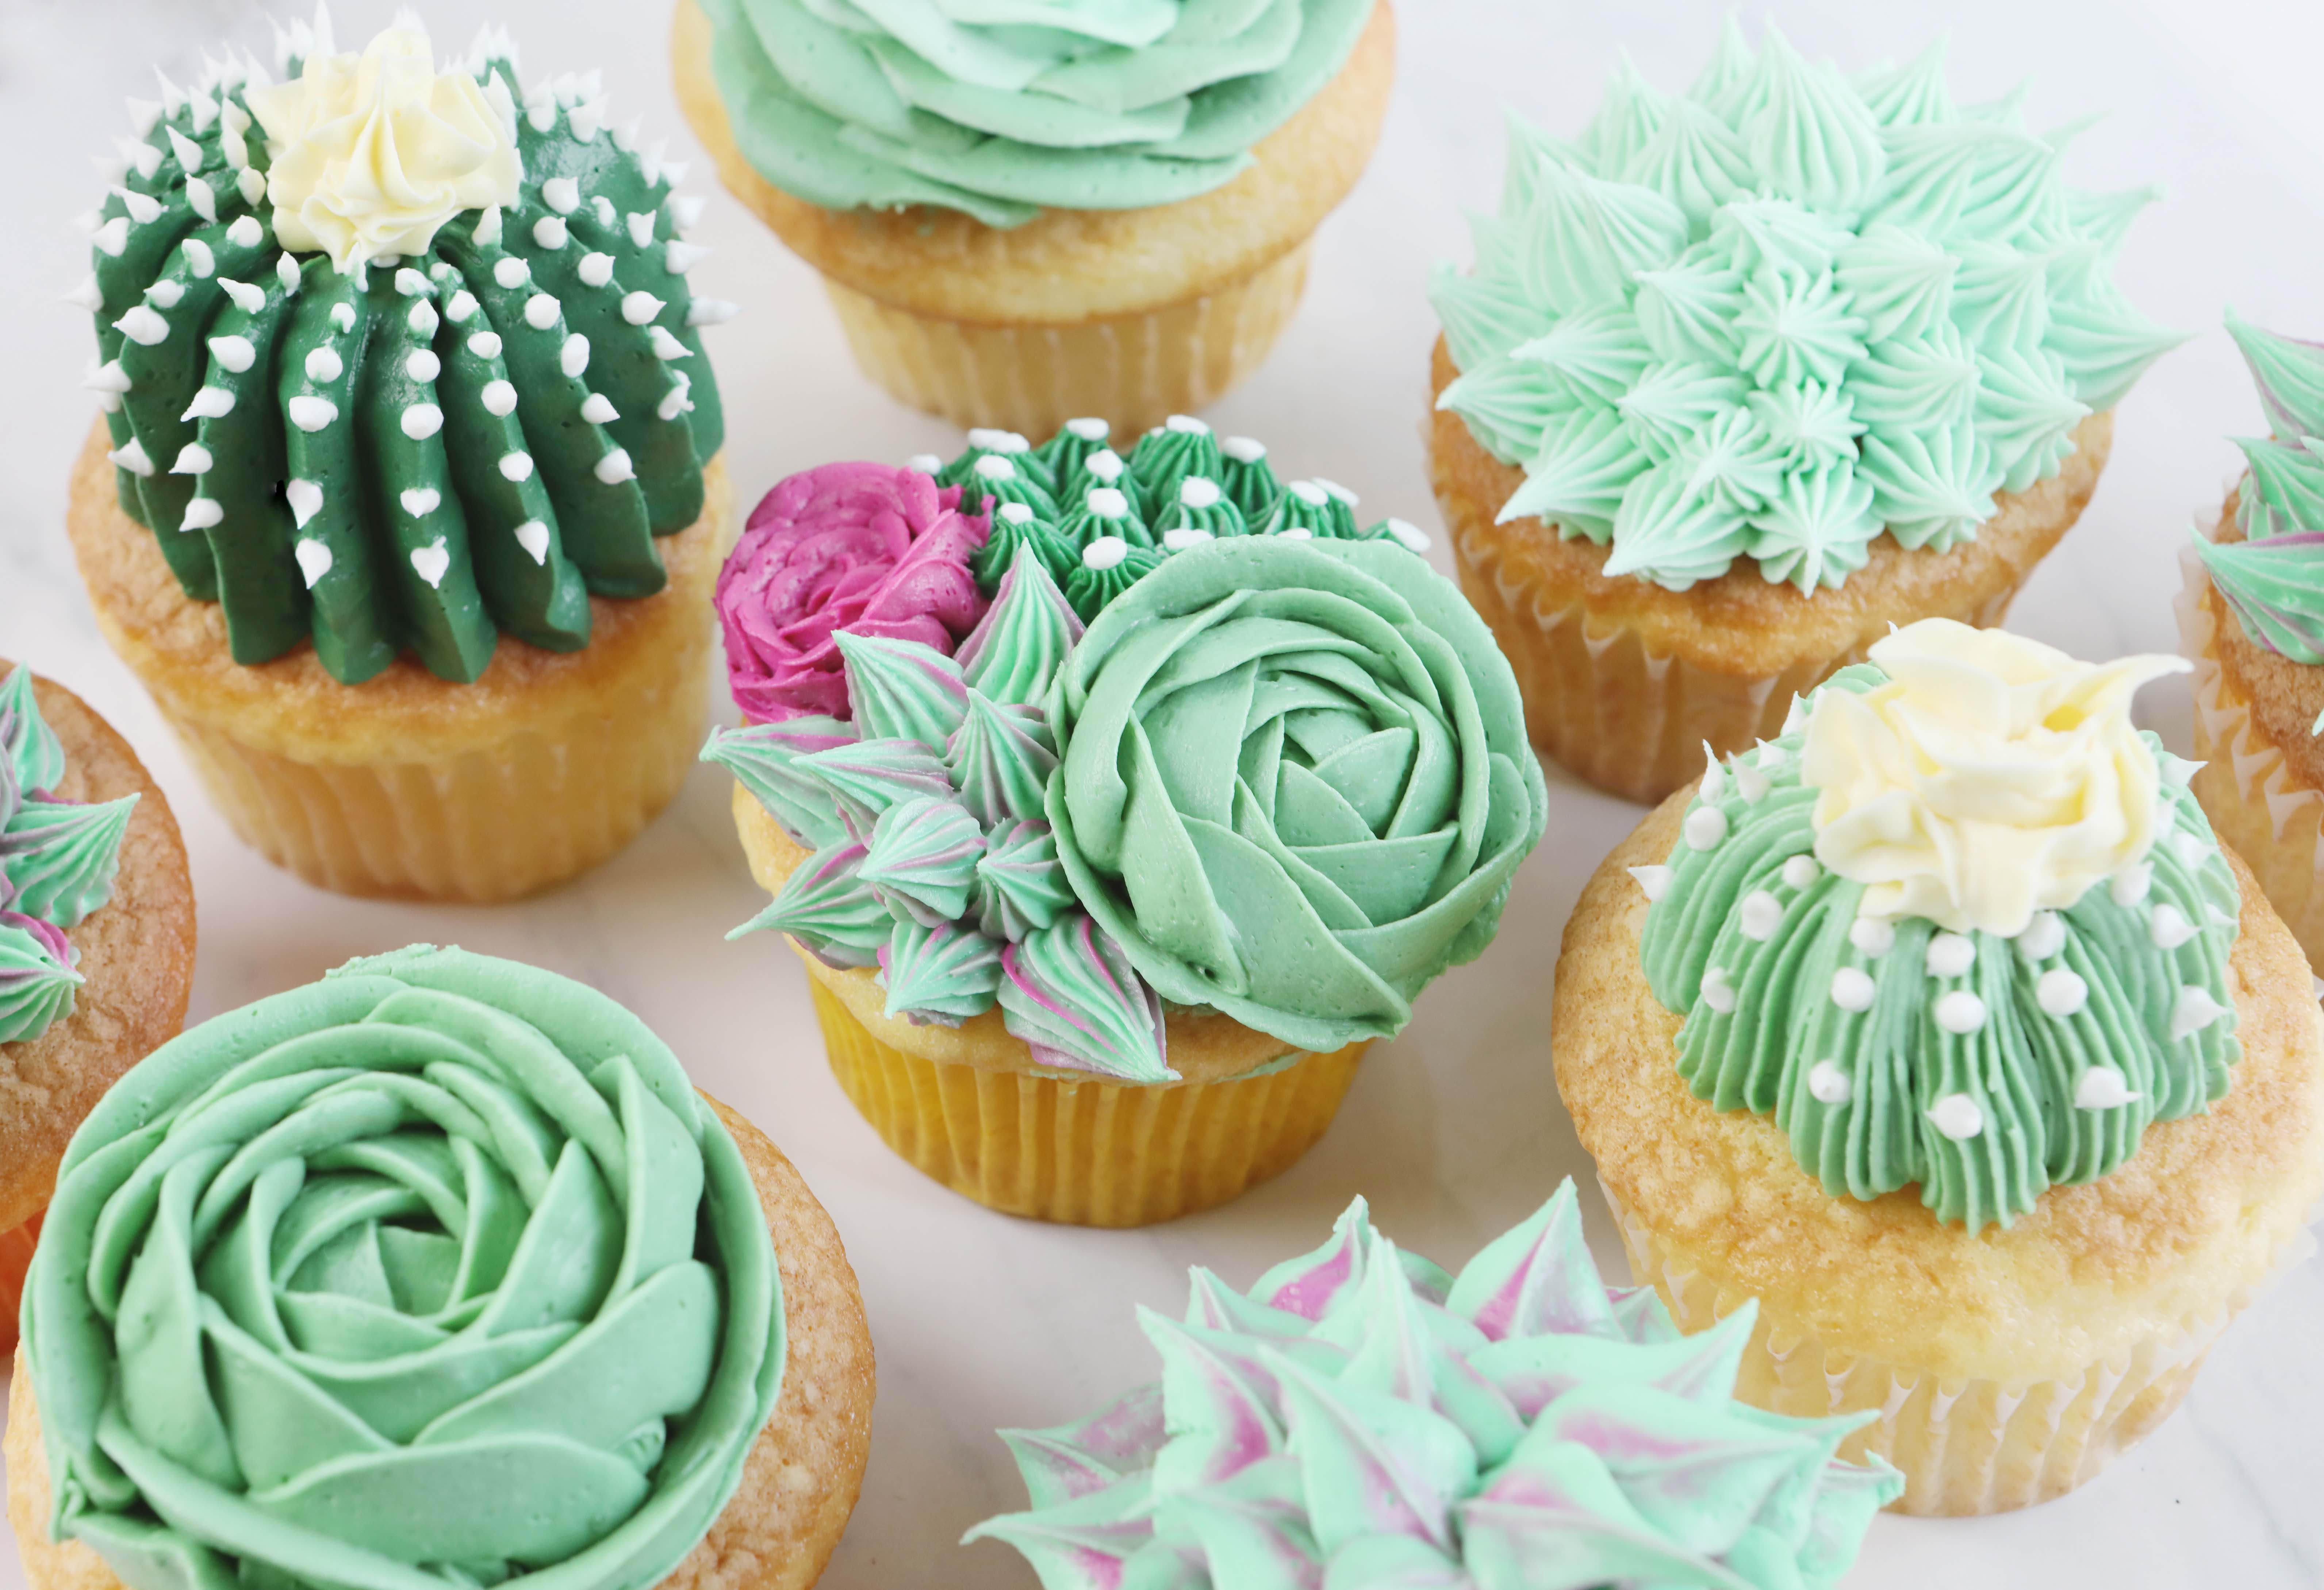 How to Make Those Succulent Cupcakes You Keep Seeing on Instagram